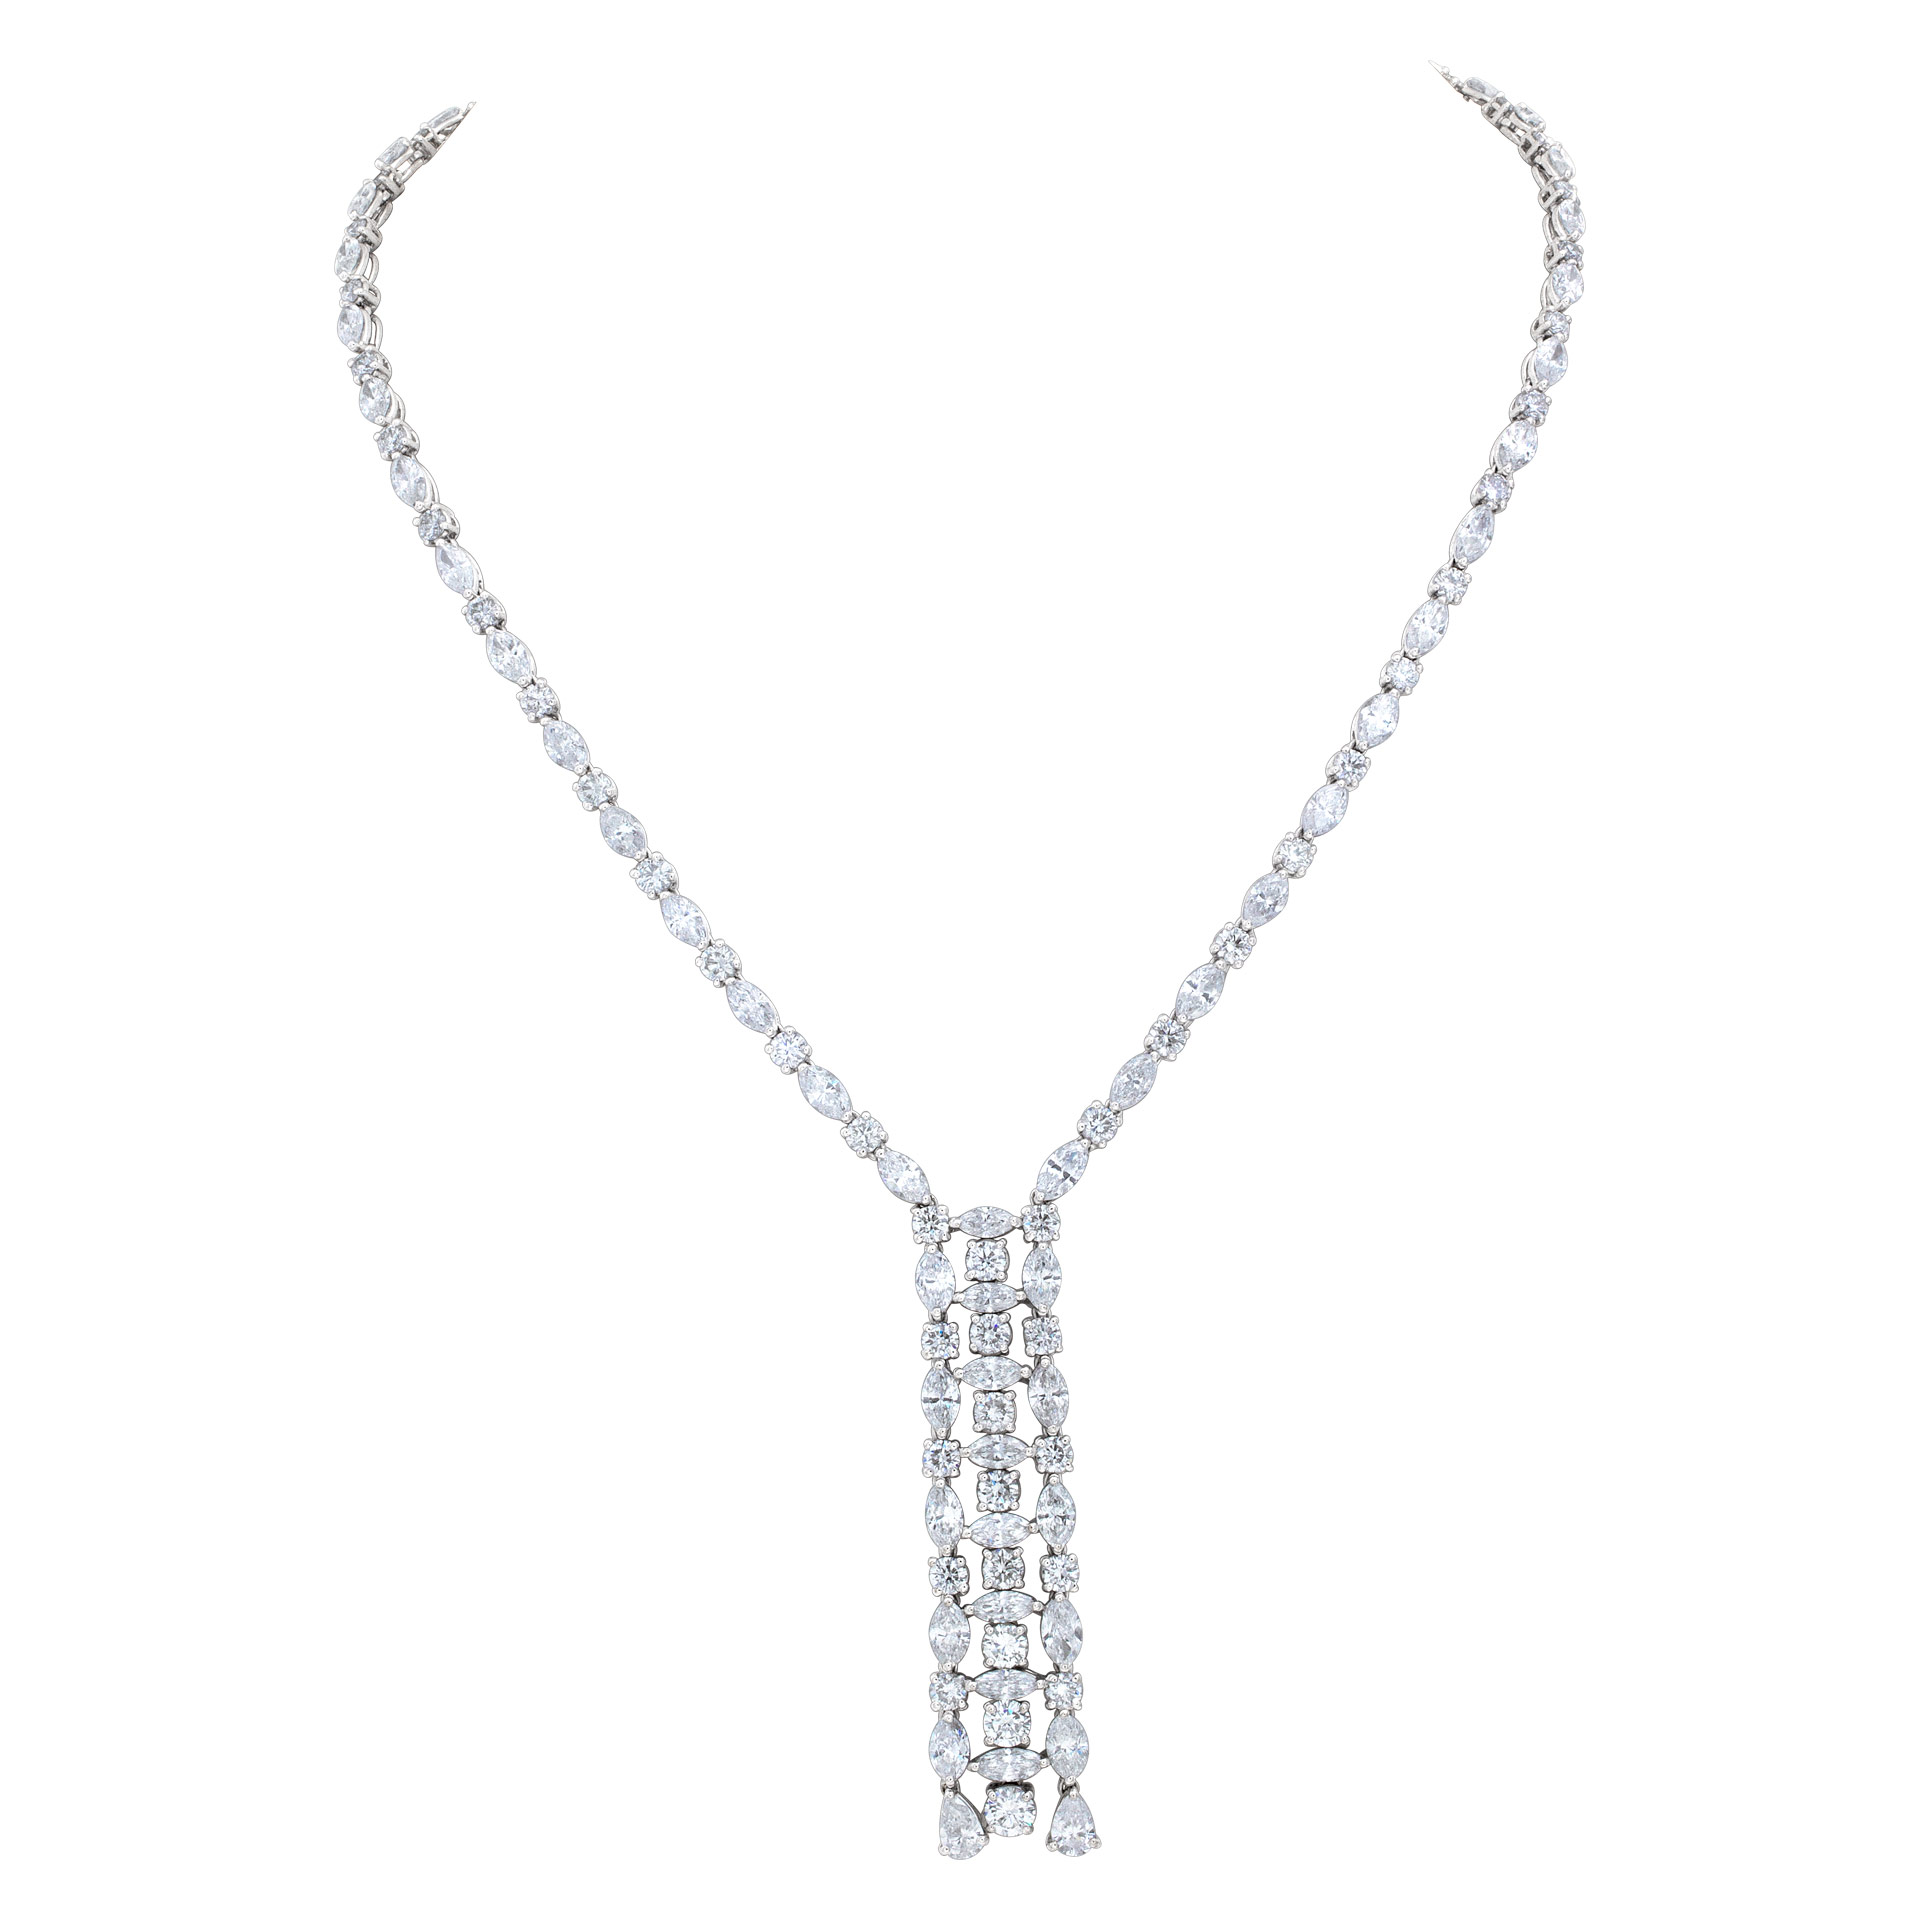 Sensual, diamond necklace with appox 22.35 carats round brilliant, pear and marquise shape diamonds image 1